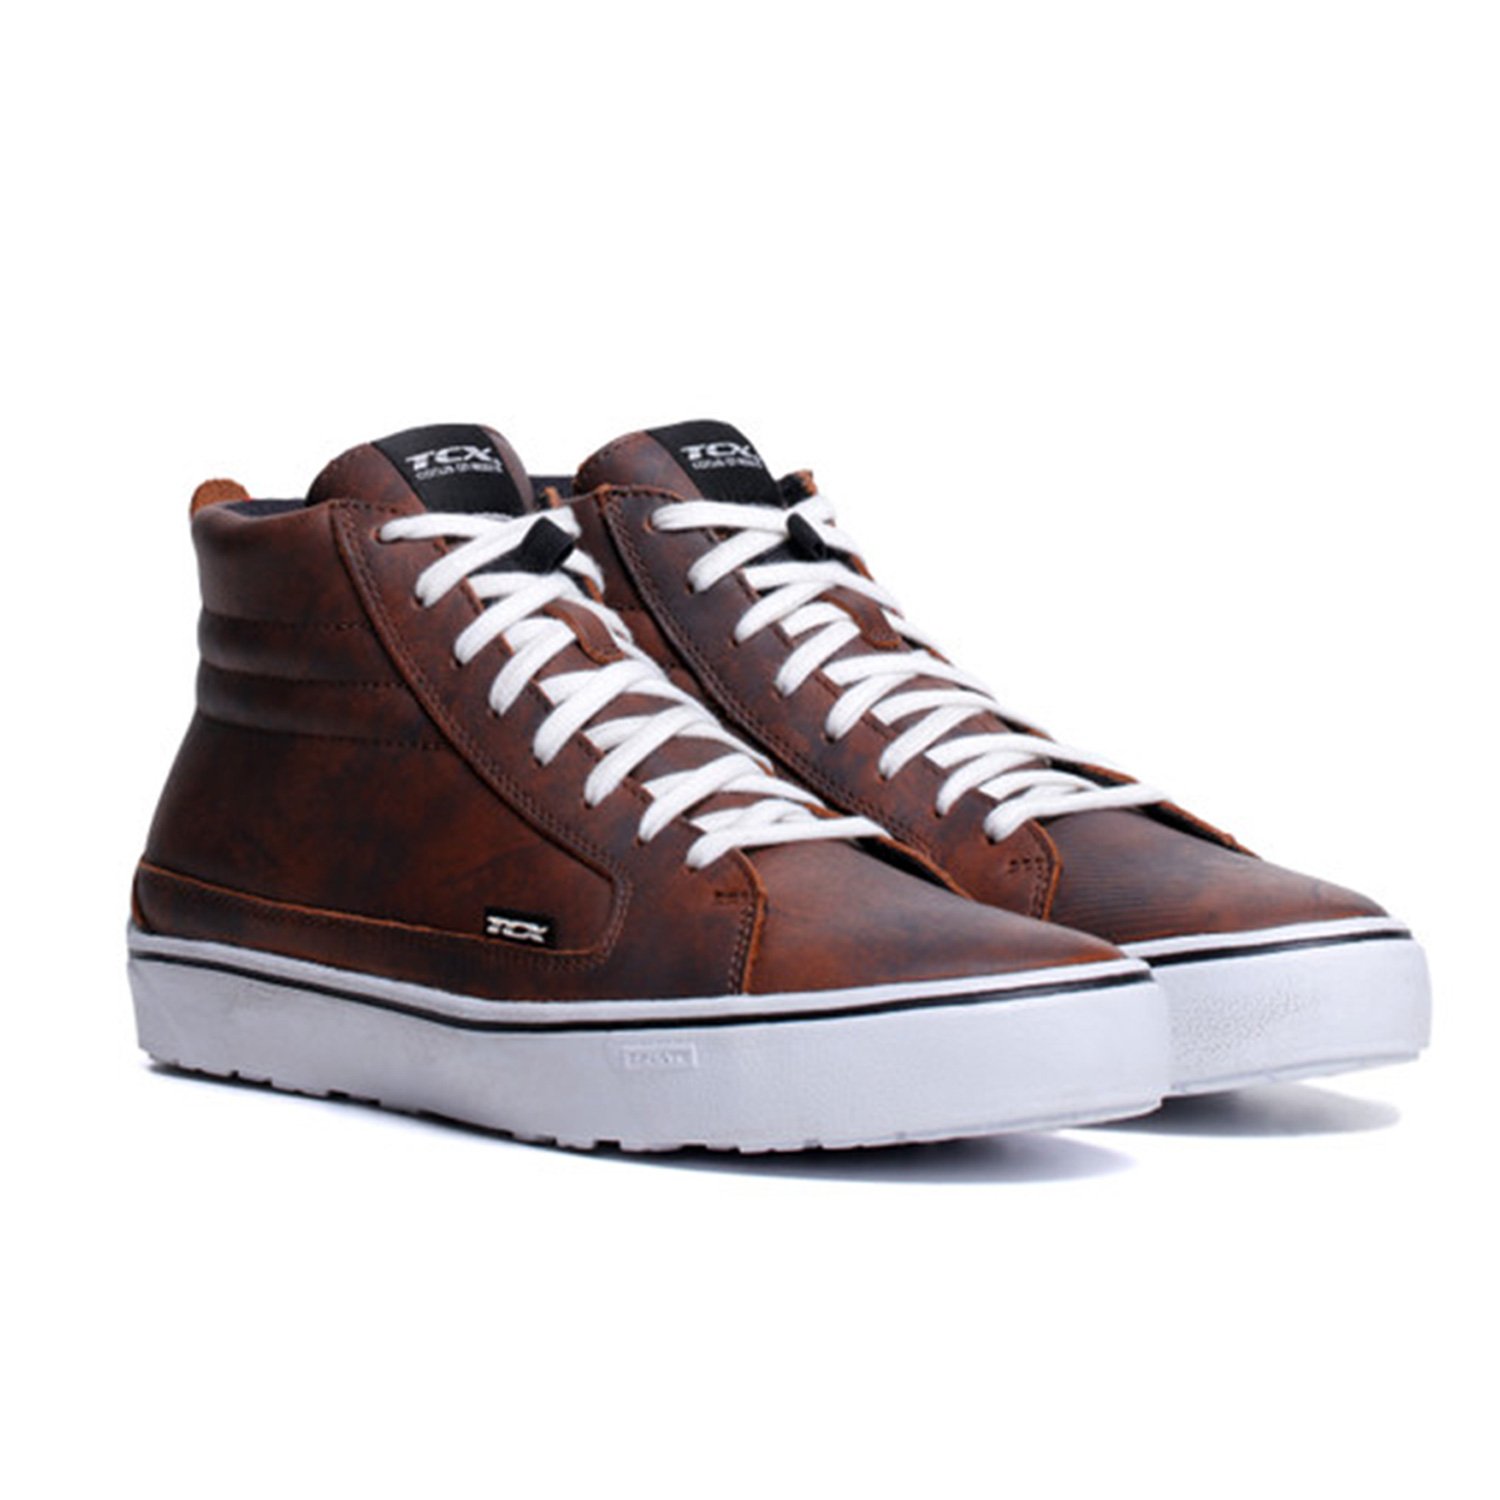 Image of TCX Street 3 WP Brown White Size 43 ID 8051019547866